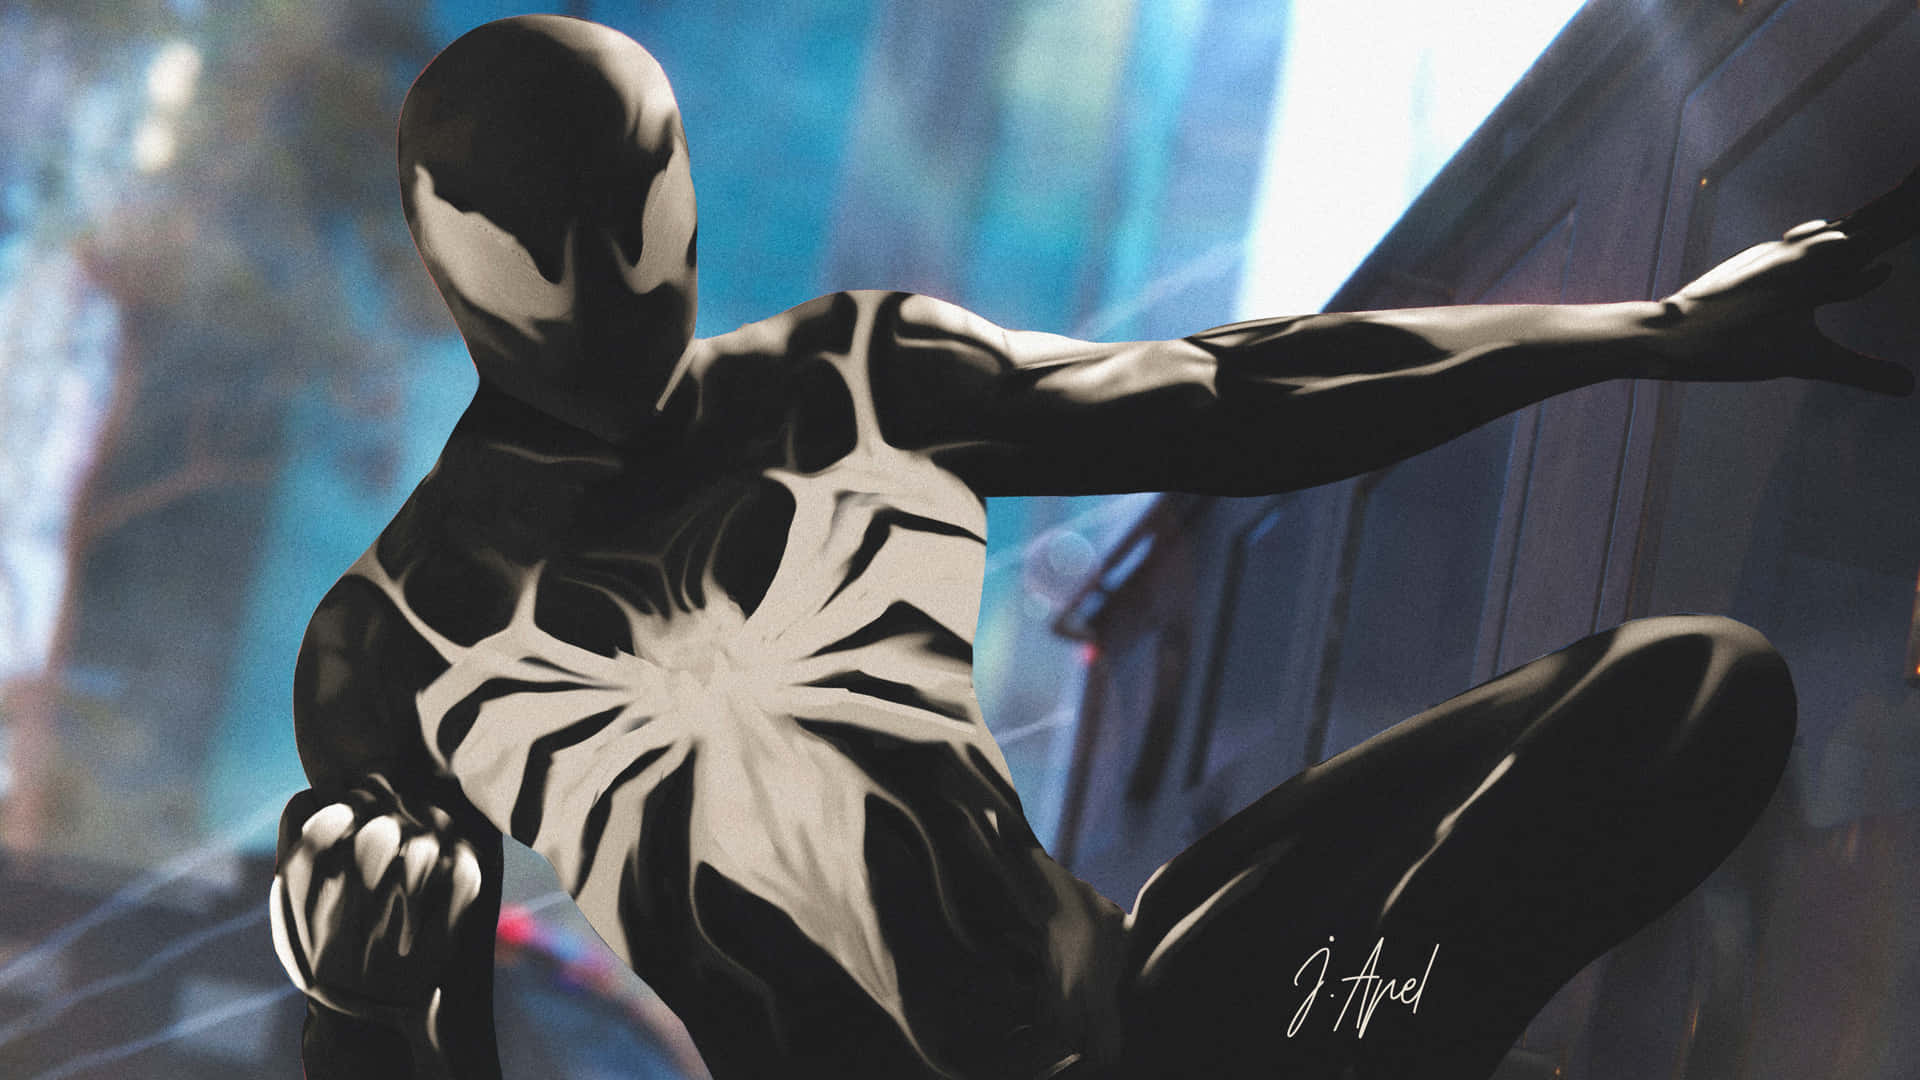 Symbiote: A Sinister Merge of Power and Darkness Wallpaper